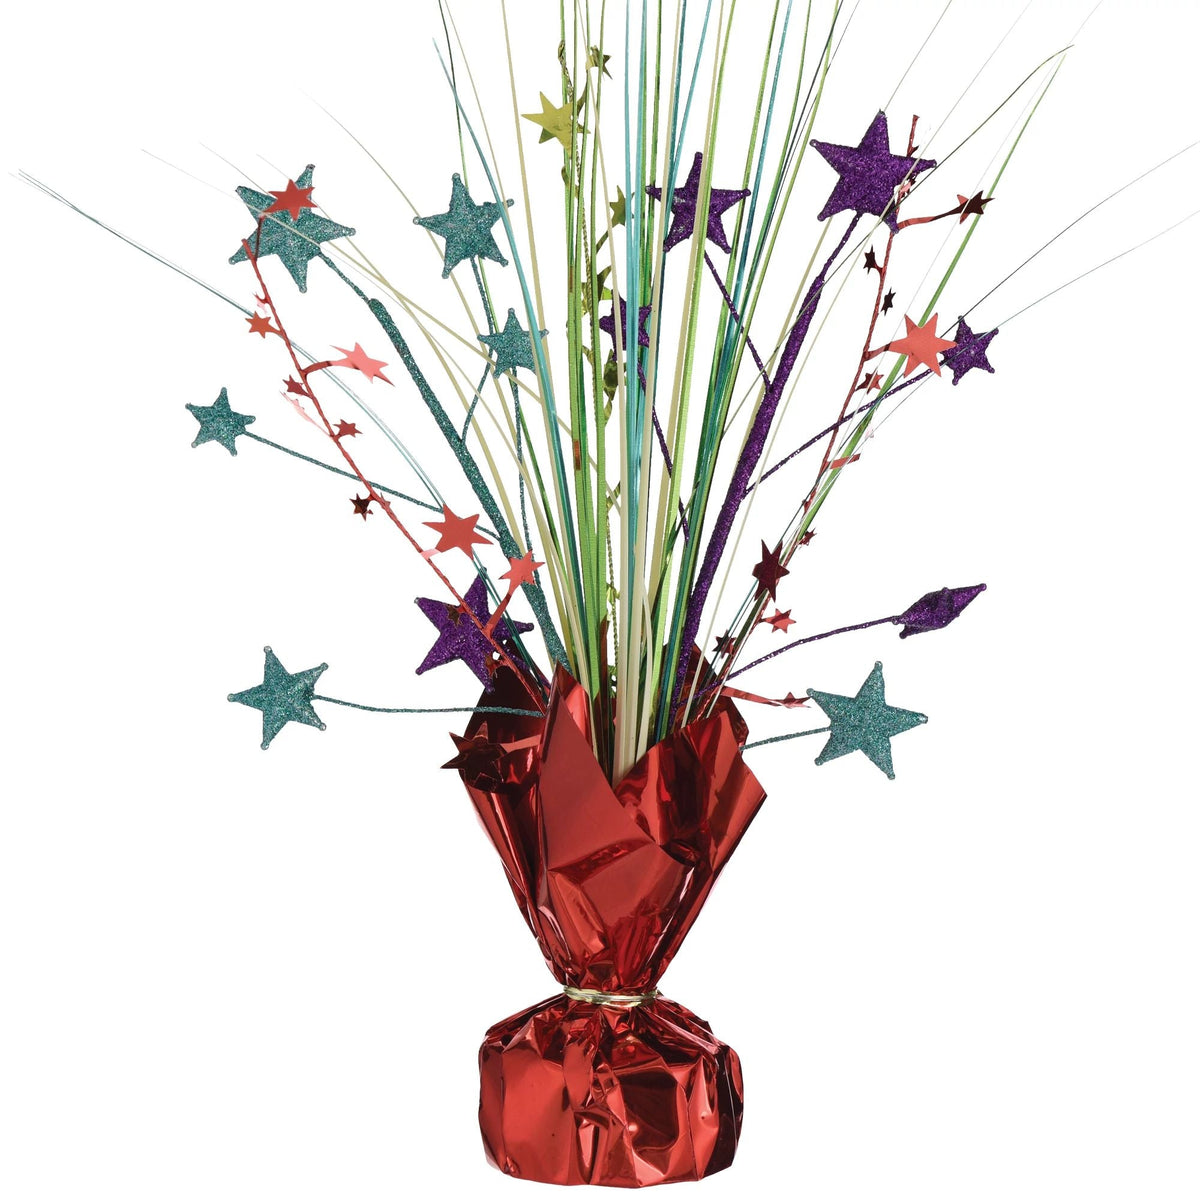 AMSCAN CA Decorations Spray Centerpiece with Stars, Rainbow, 12 Inches, 1 Count 192937416433